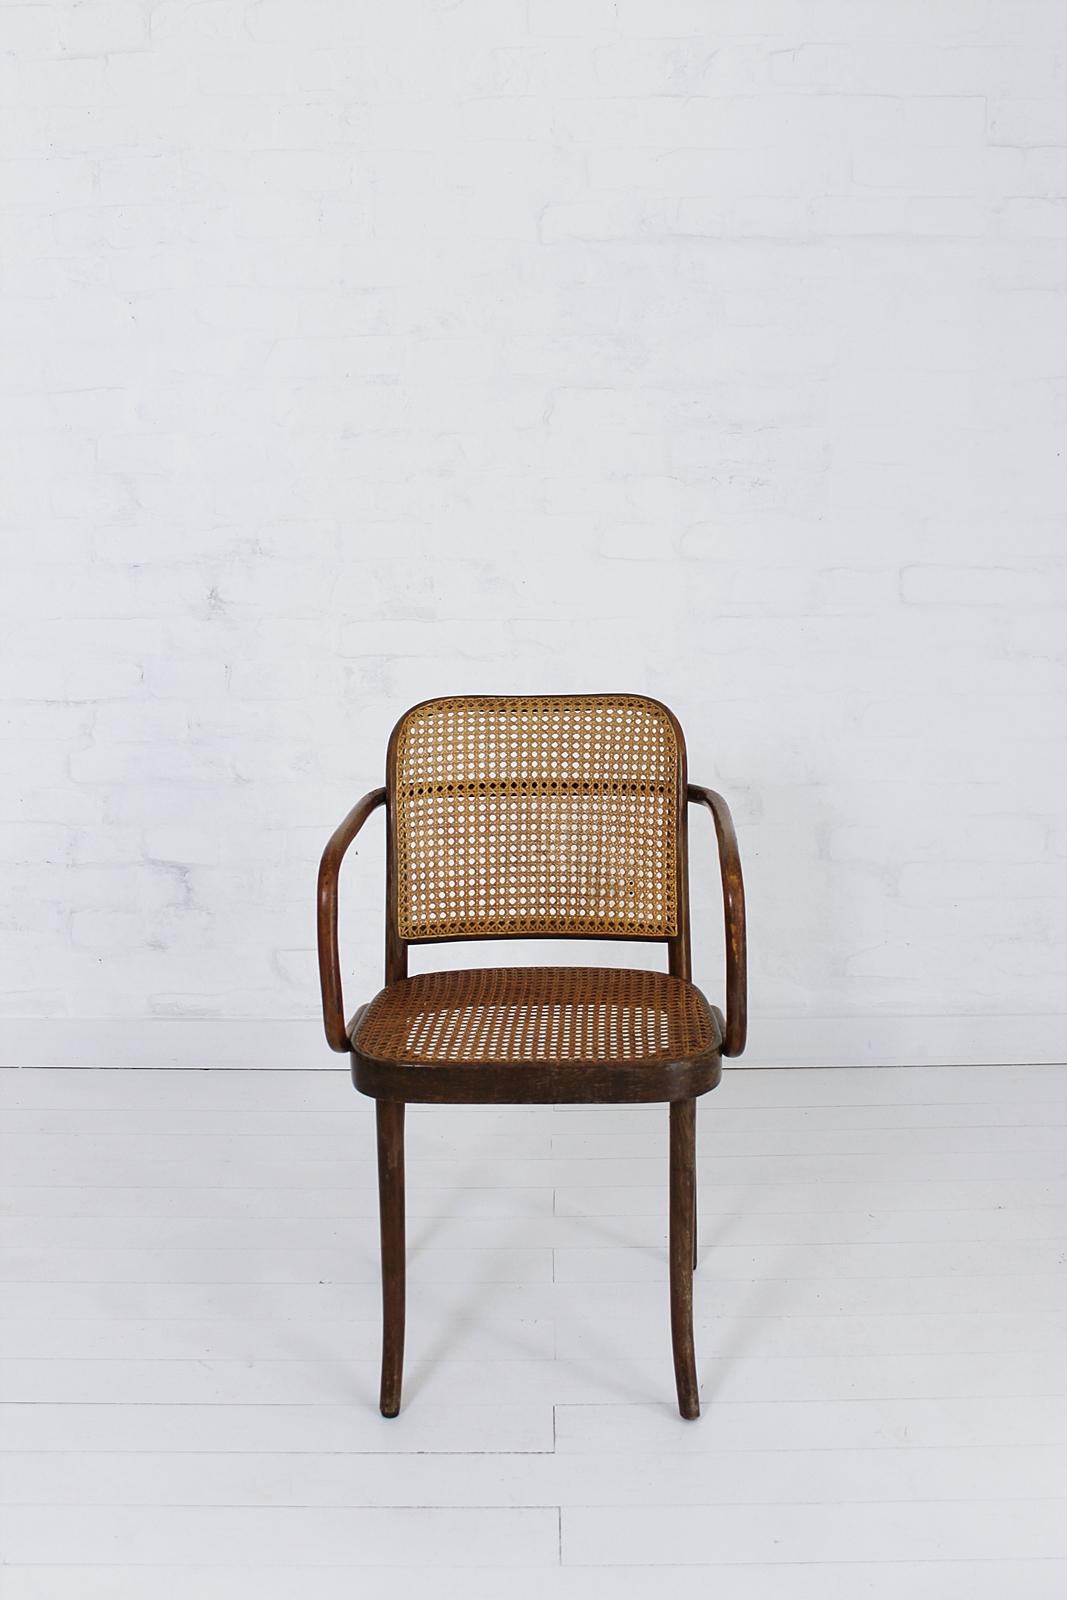 Stunning vintage armchair designed by Josef Hoffmann. Made in beech handcrafted curved seat and back. The chair was designed in 1925 but it still remains a current design. In good vintage condition, with minor wear consistent of age and use.